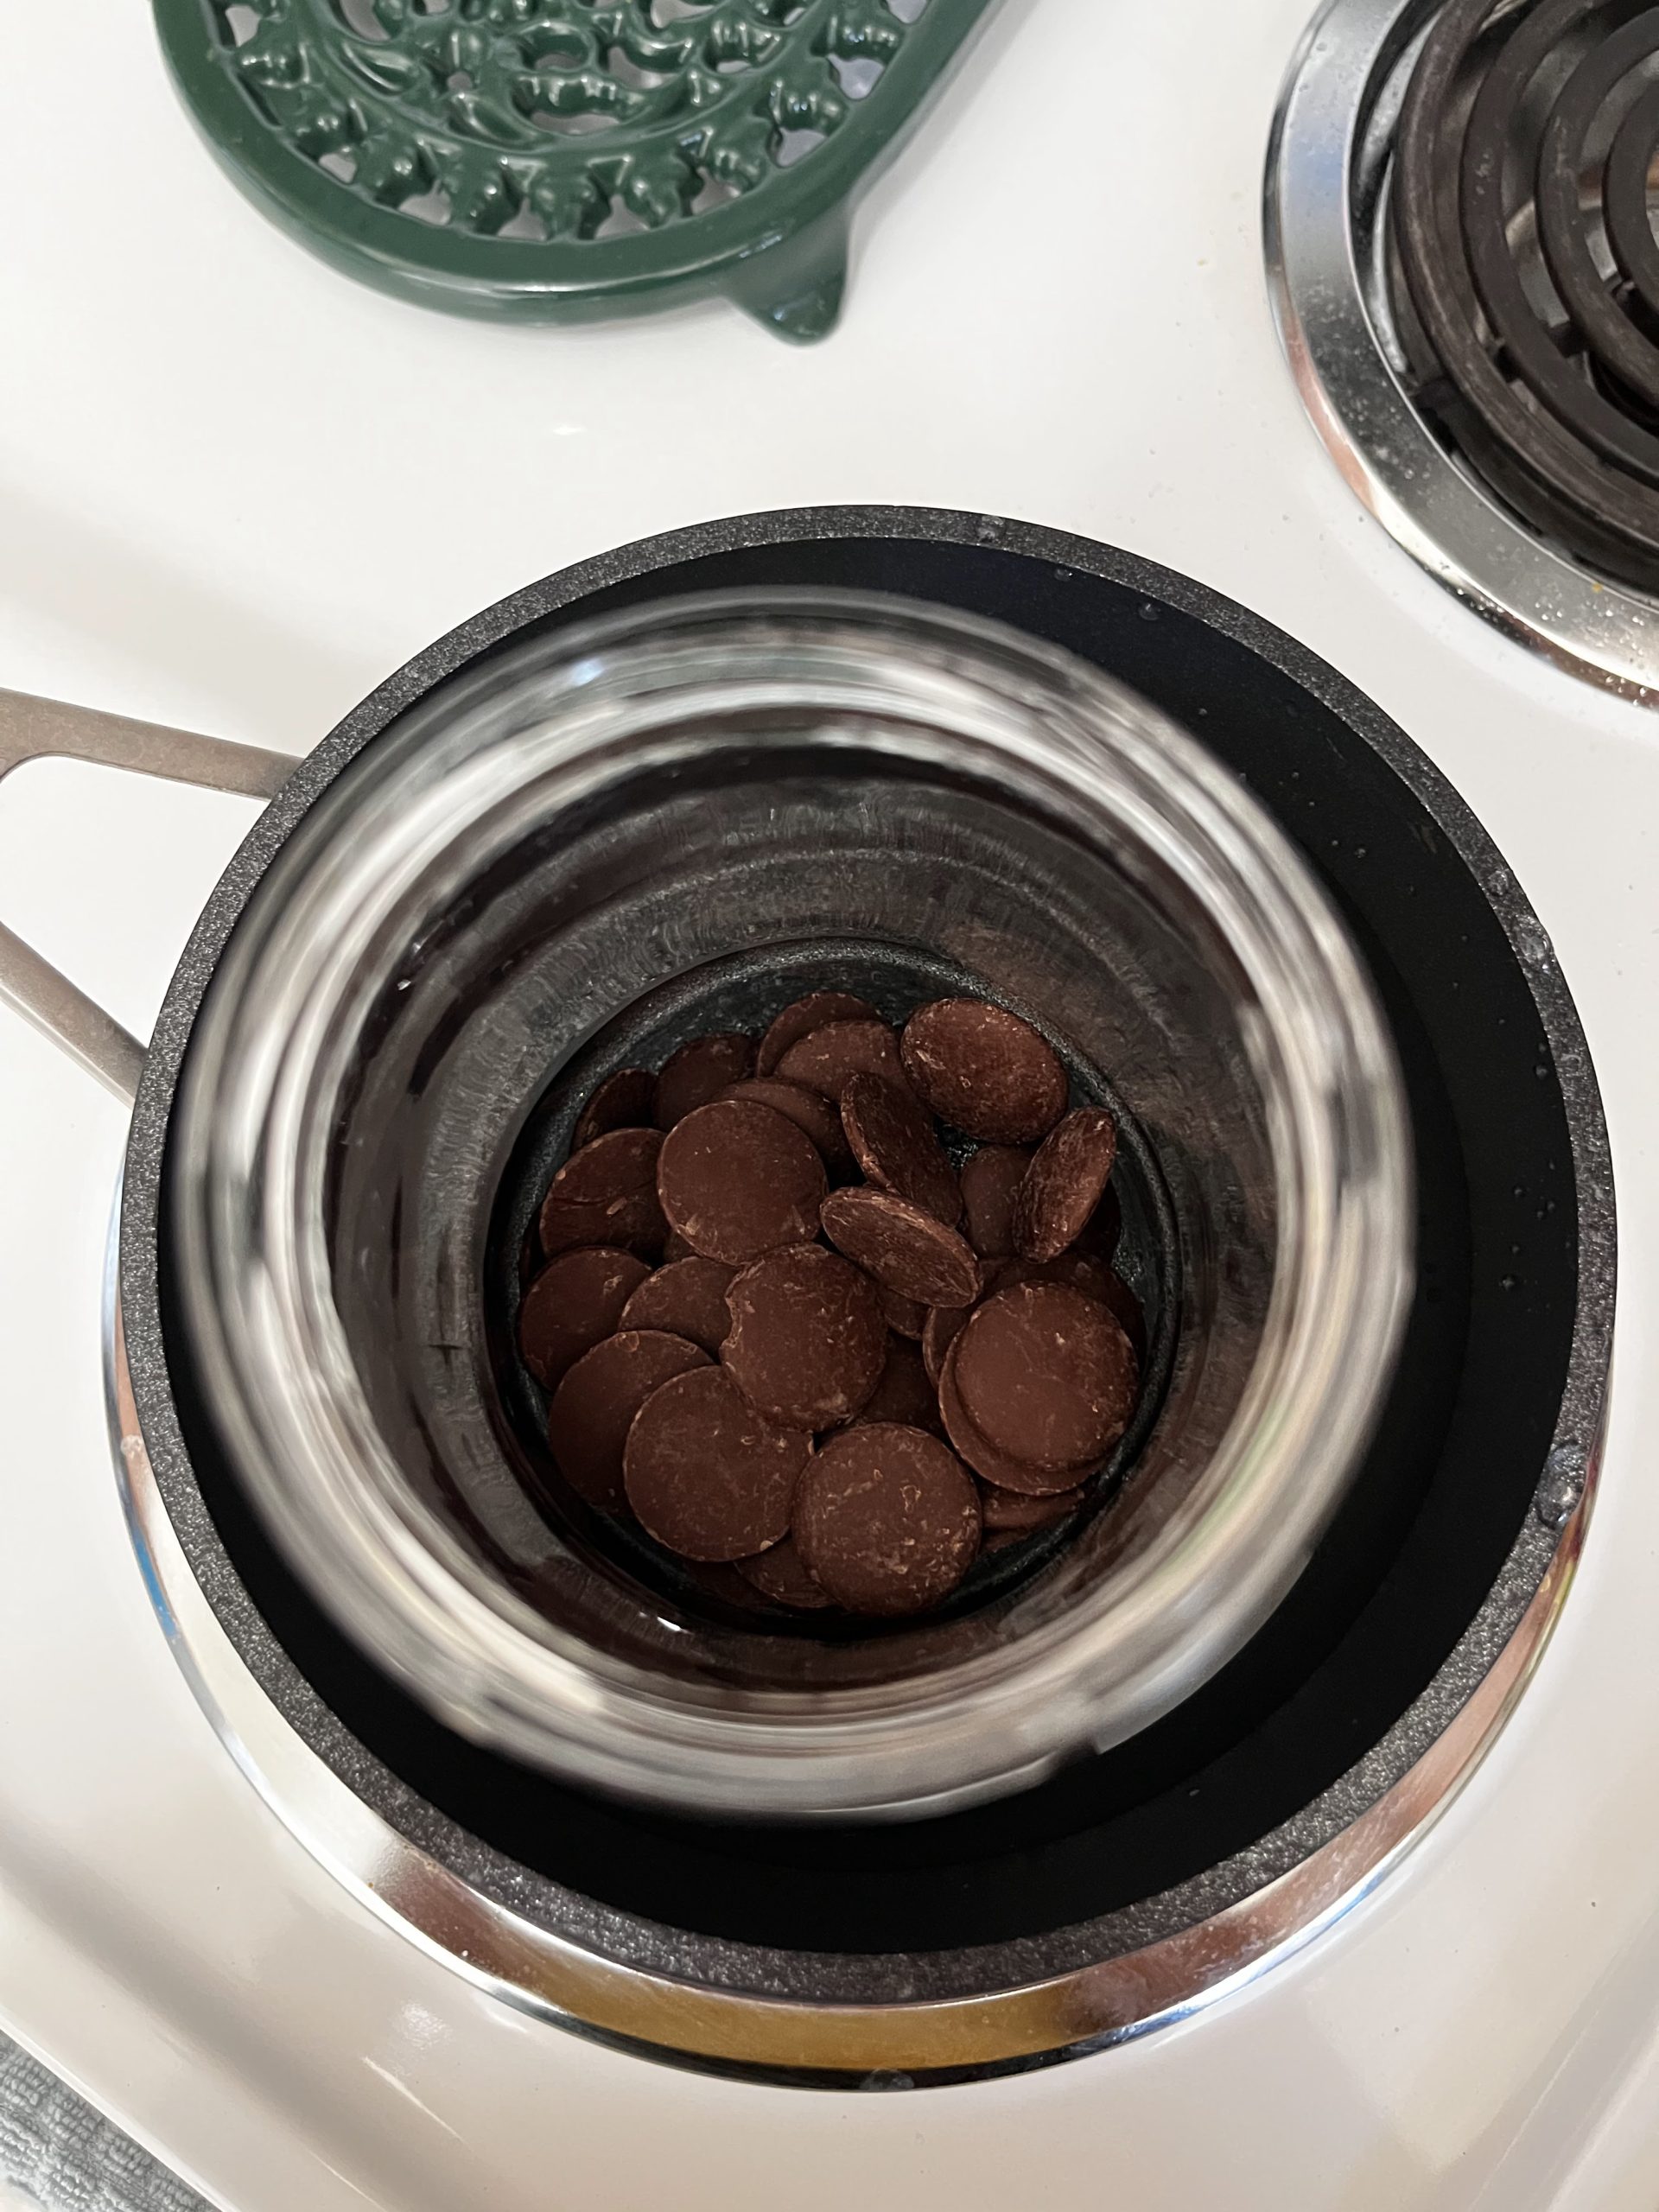 Double boiler on the stove with chocolate that is ready to be melted.